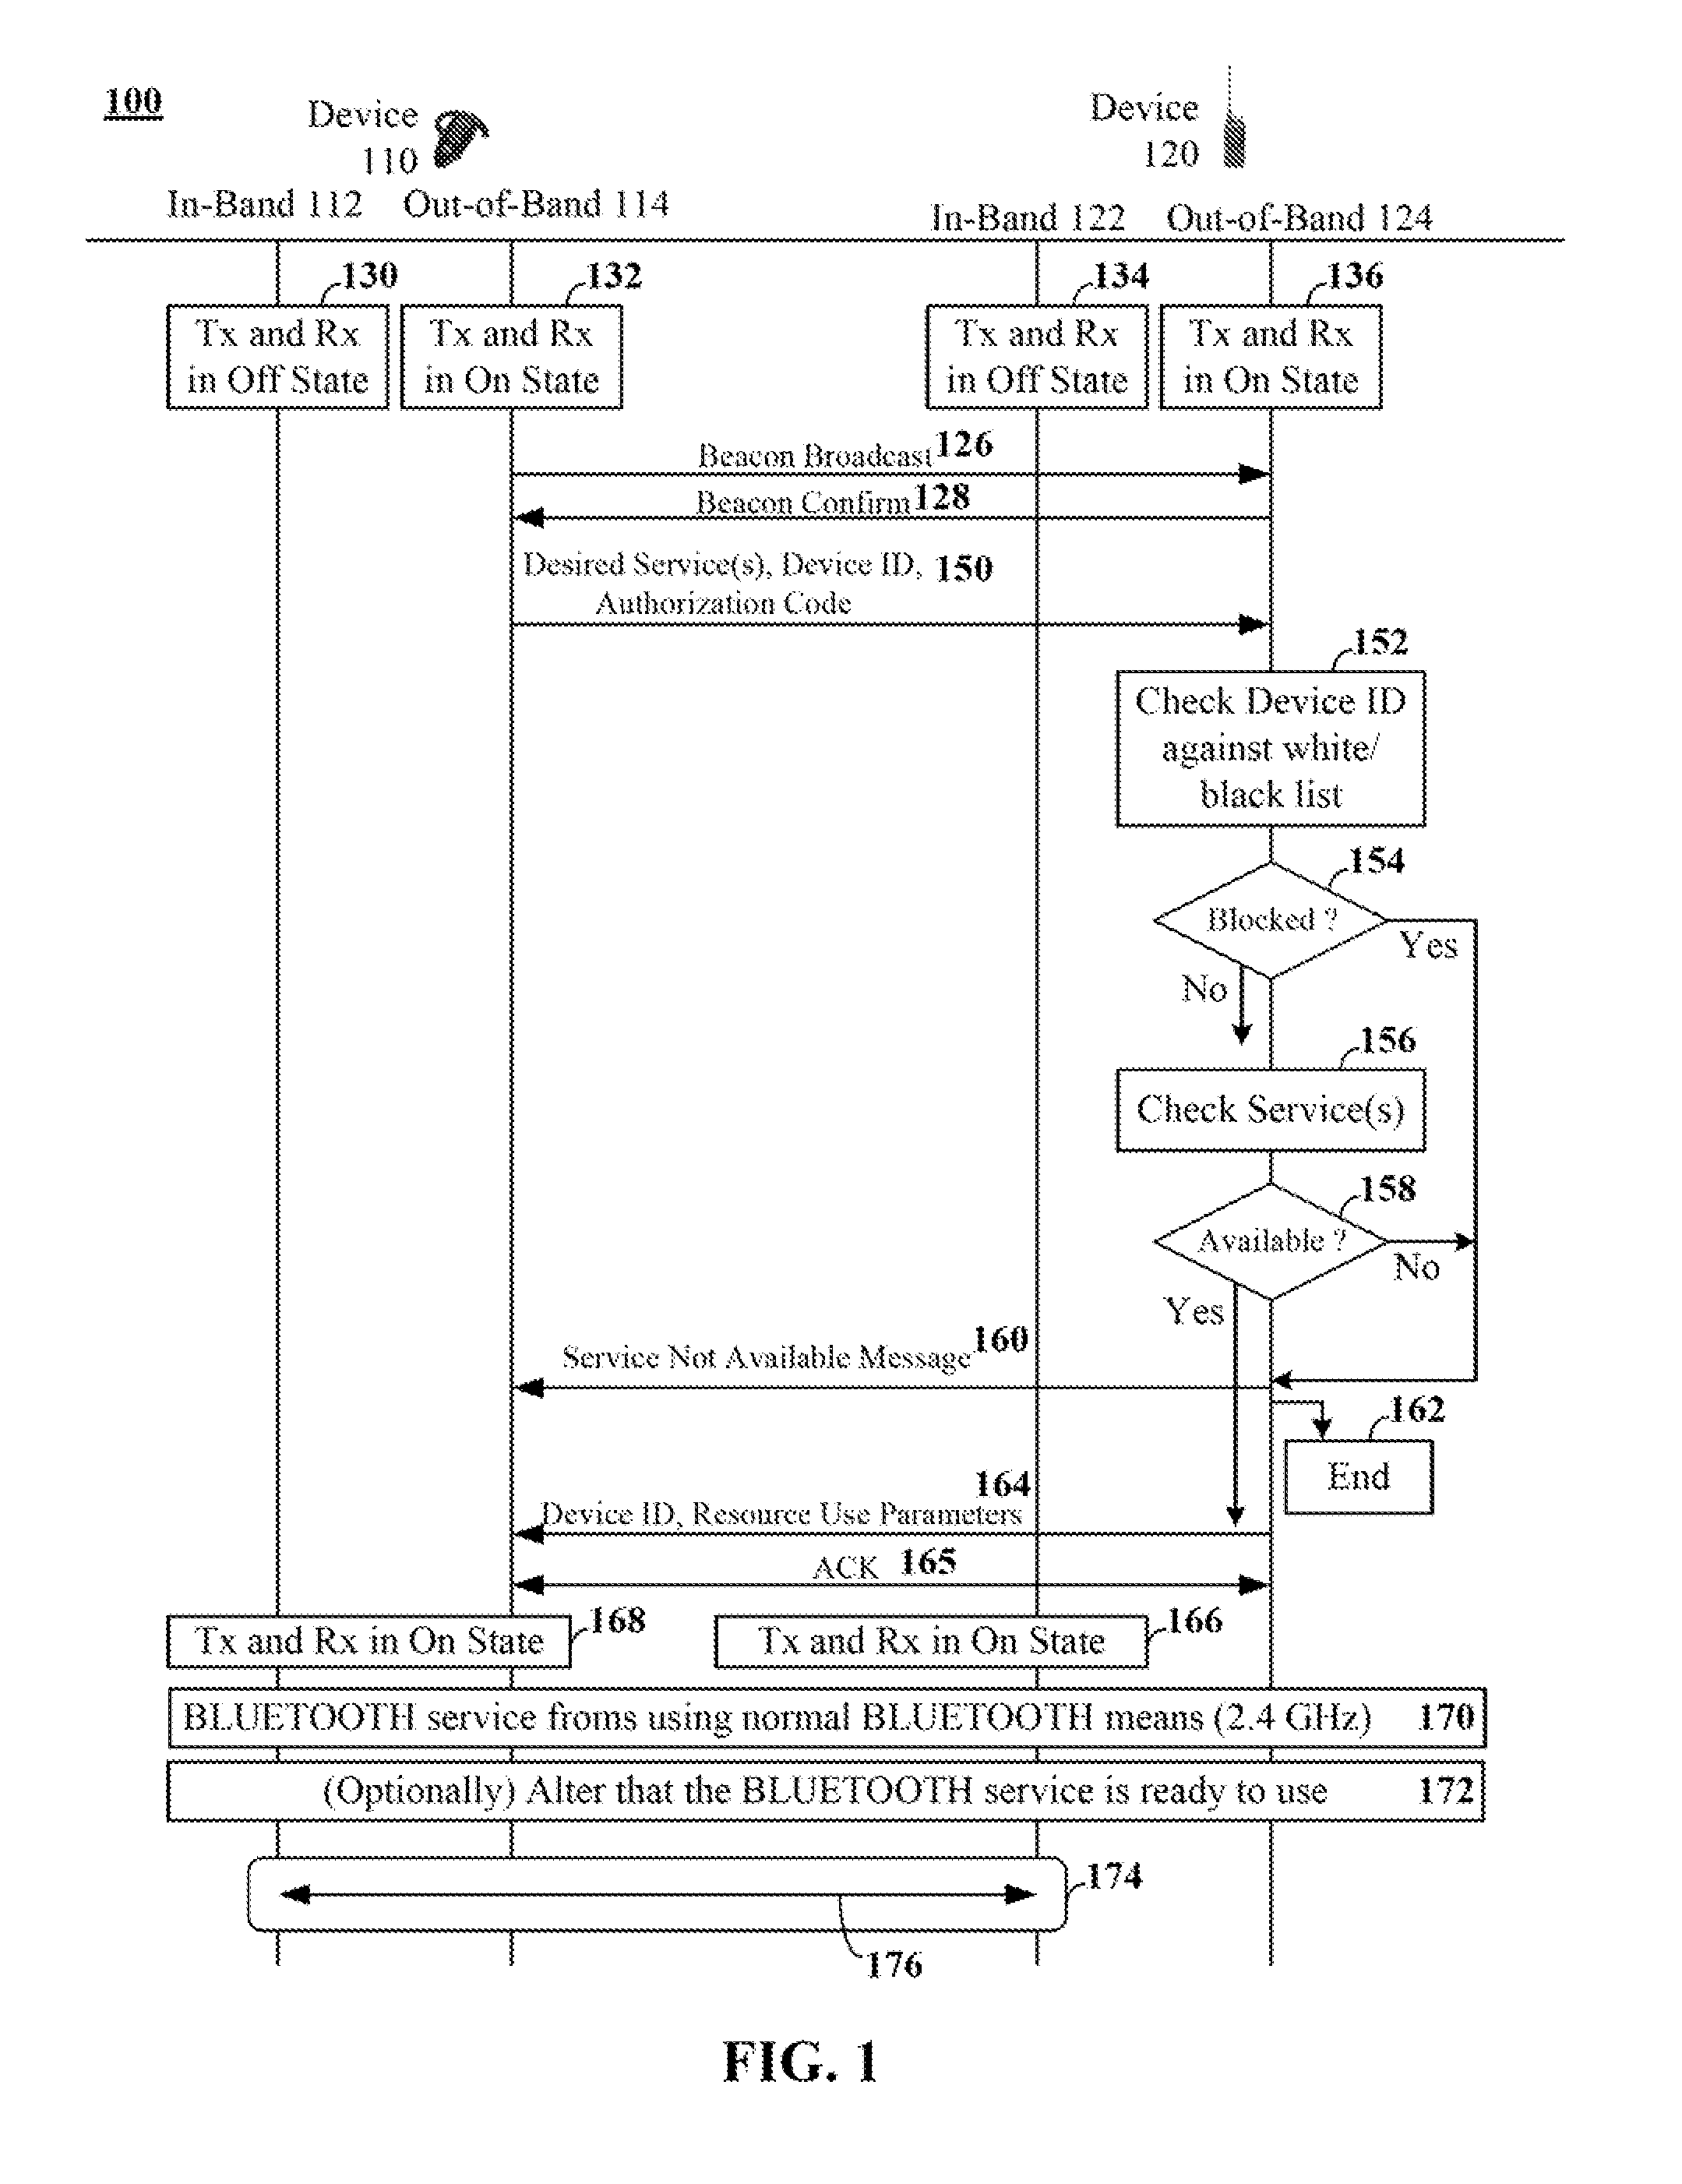 Pairing devices using data exchanged in an out-of-band channel